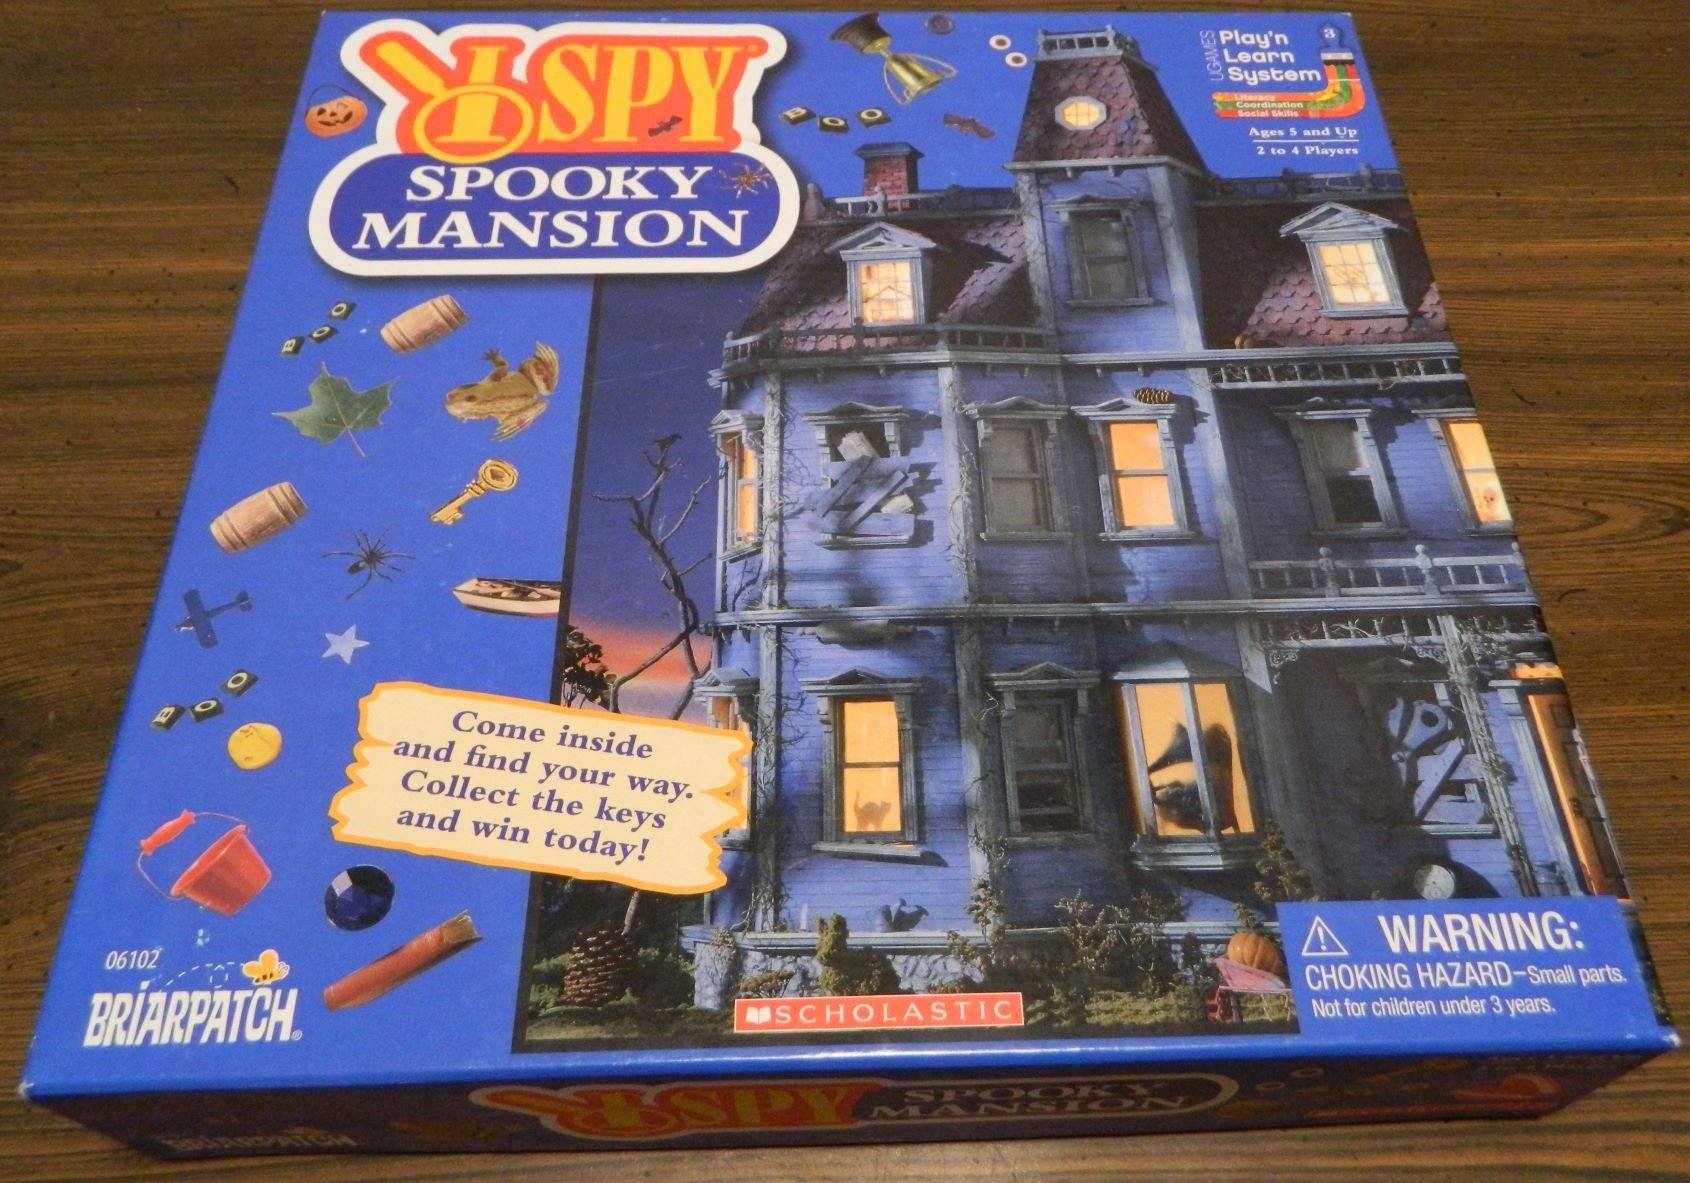 I Spy Spooky Mansion Board Game Review and Rules